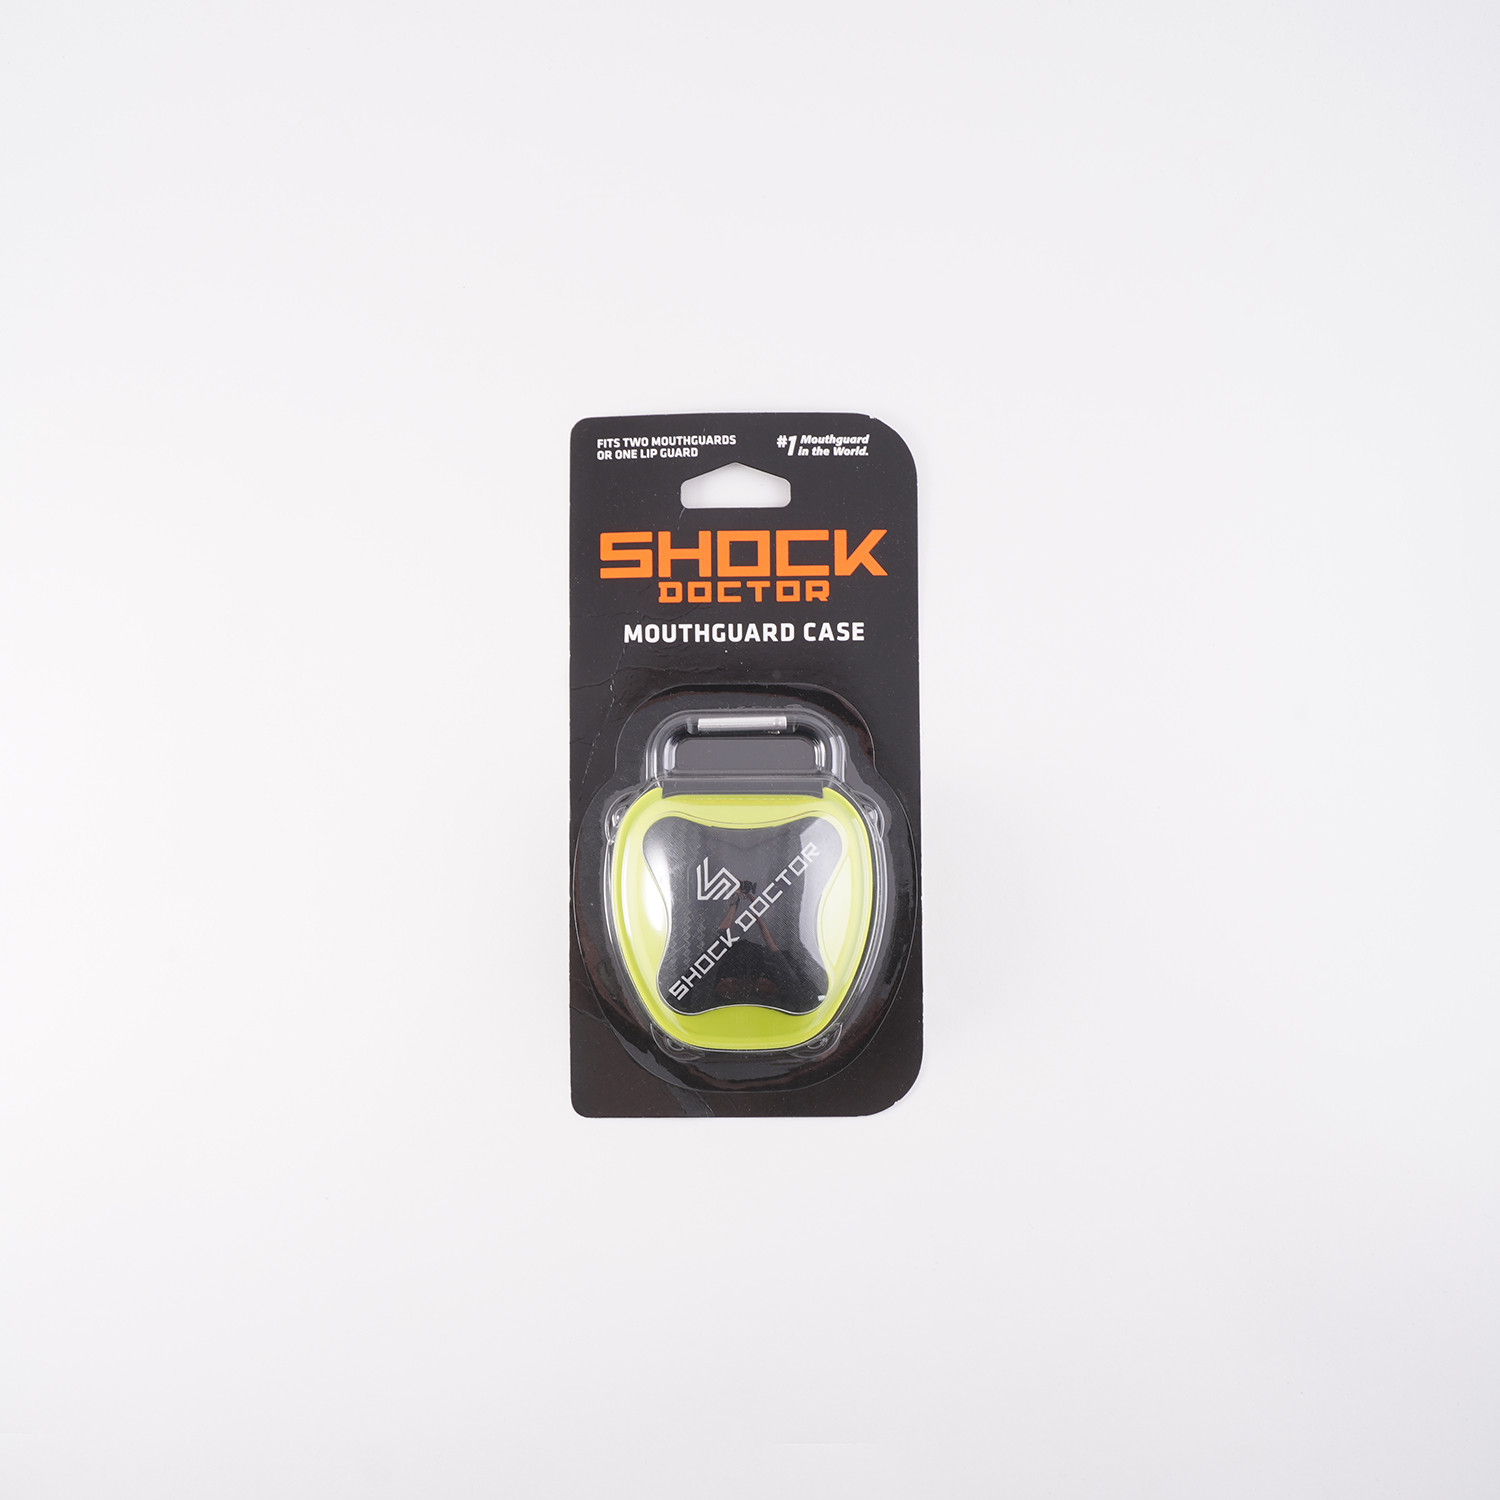 Shock Doctor MouthGUard Case - Μασελάκι (9000053580_3565)